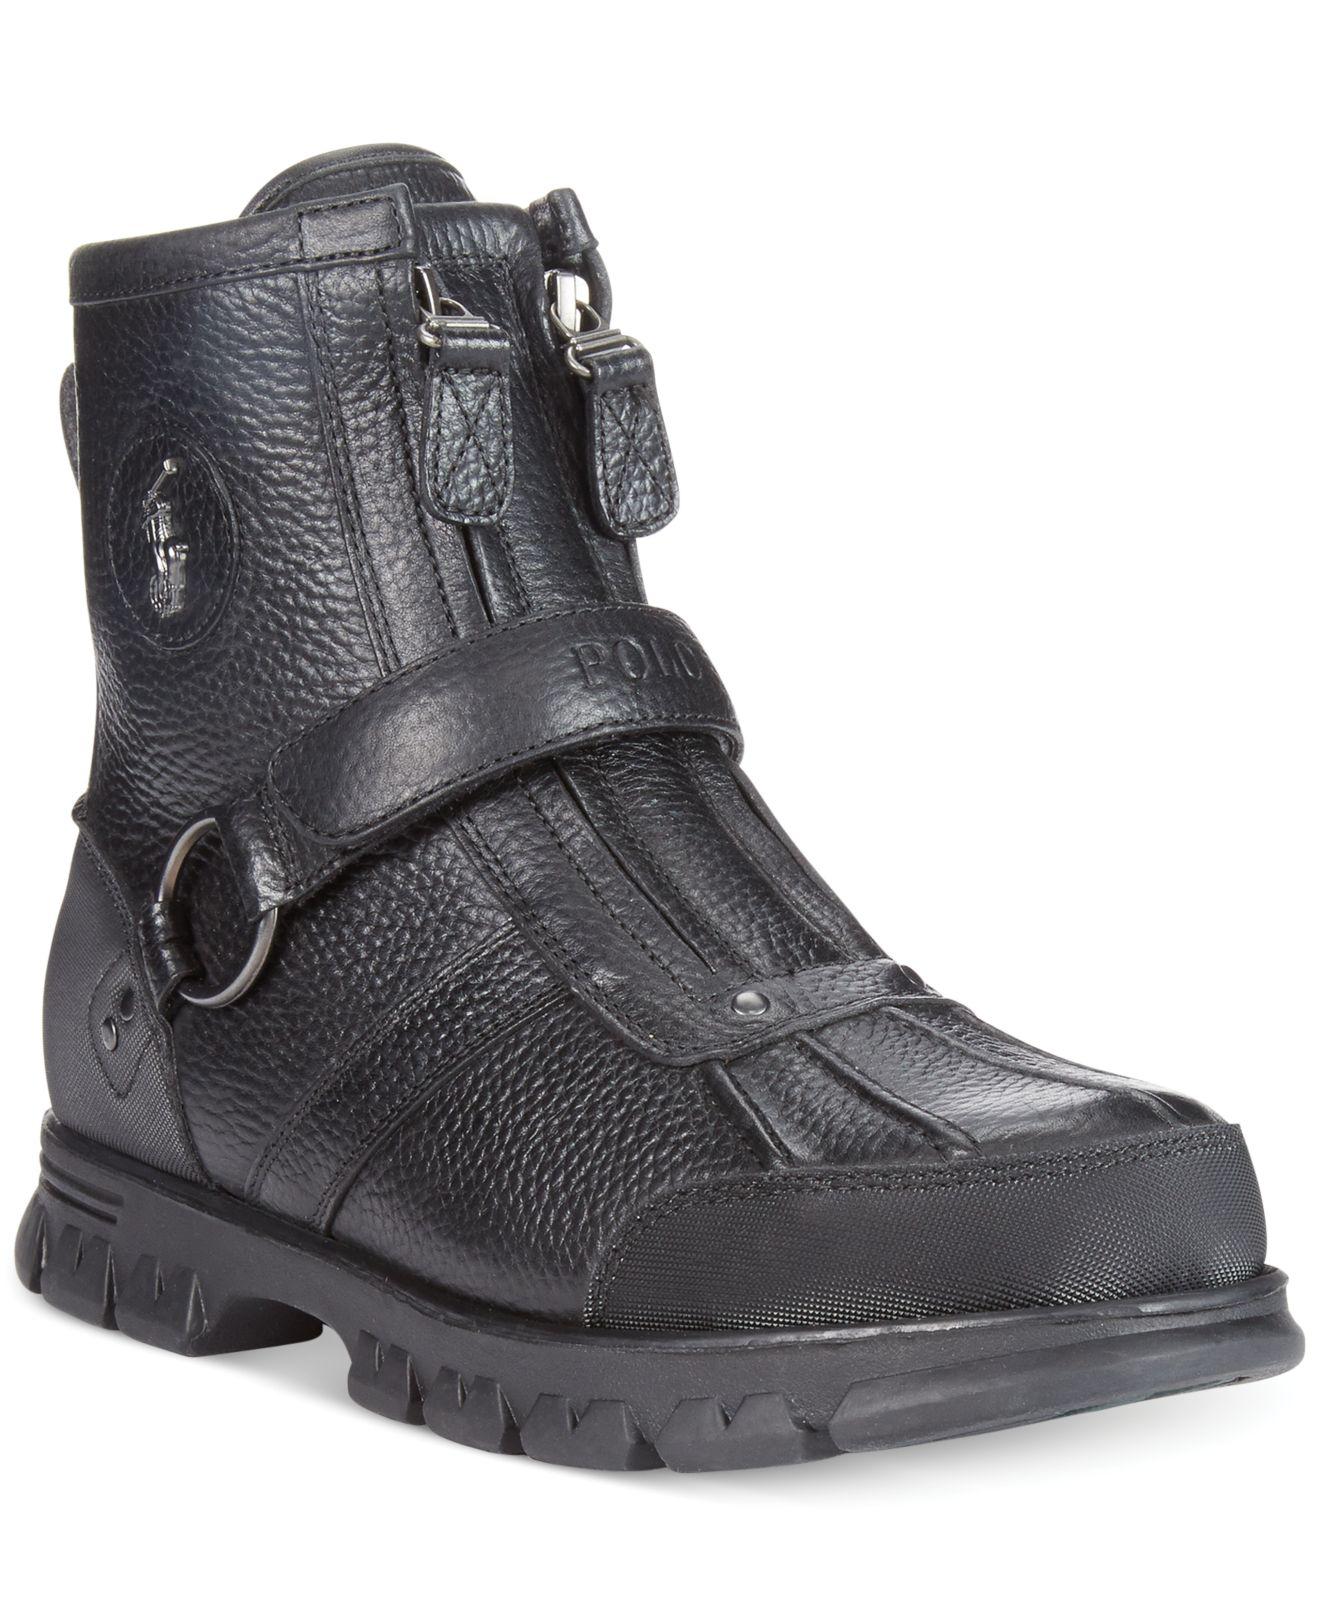 Lyst - Polo Ralph Lauren Boots, Conquest Iii High Boots in Black for Men